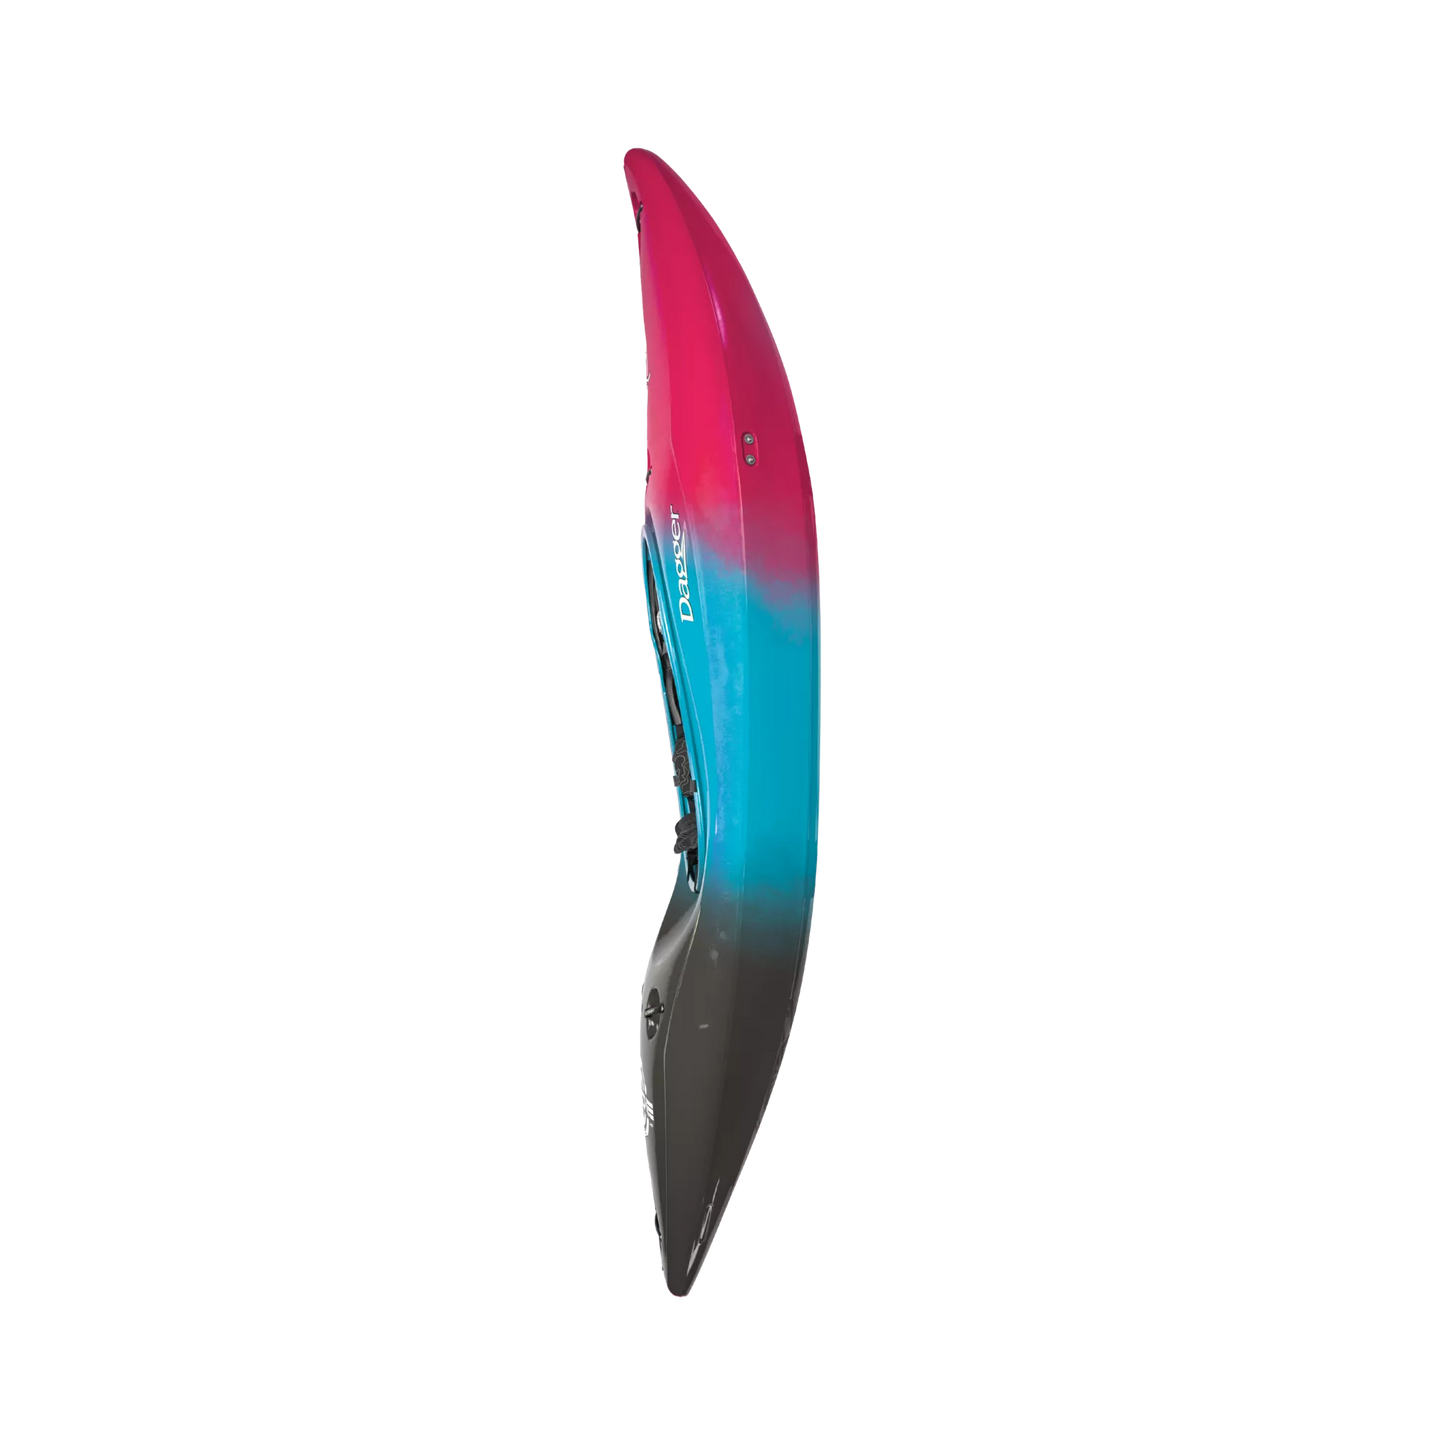 A pink and blue Code surfboard on a black background made by Dagger.